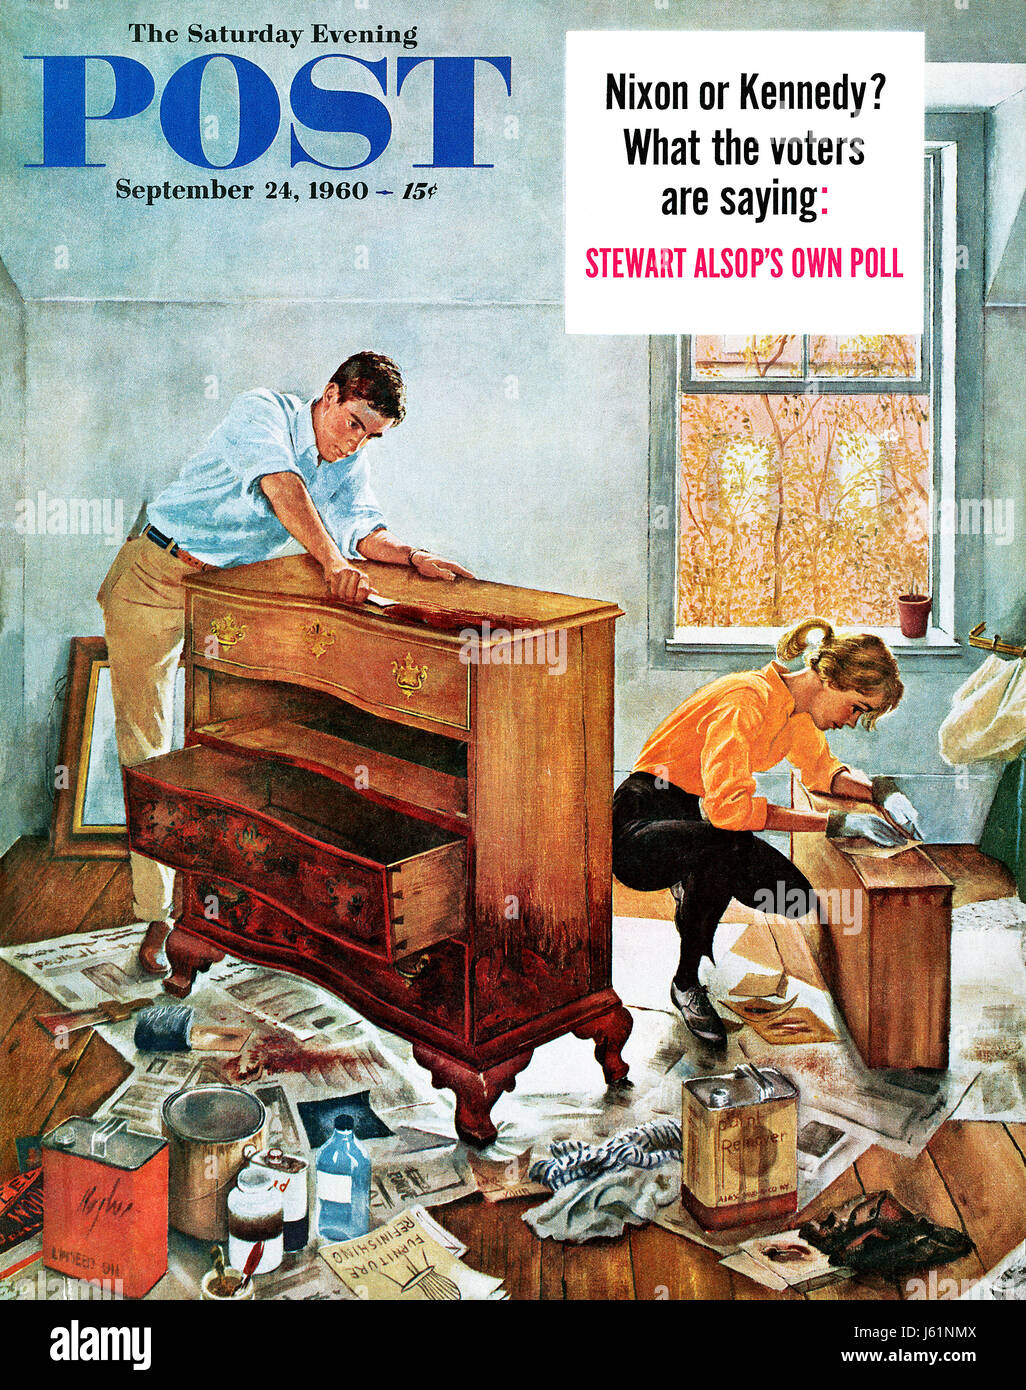 https://c8.alamy.com/comp/J61NMX/front-cover-of-the-saturday-evening-post-for-24th-september-1960-featuring-J61NMX.jpg